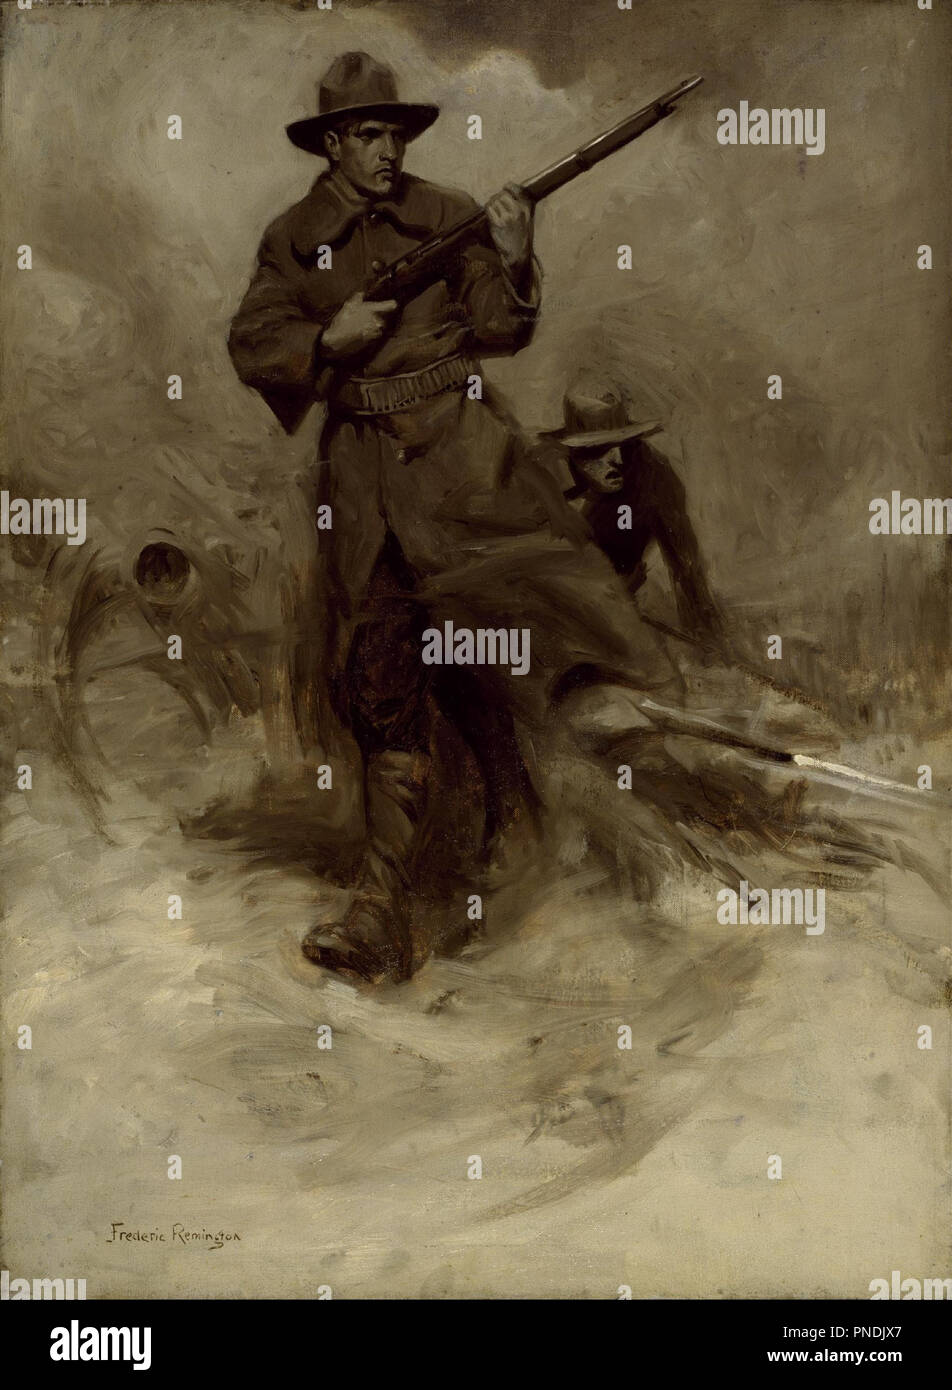 Spanish-American War Soldiers in Action. Date/Period: 1899/1903. Painting. Oil on canvas. Width: 55.9 cm. Height: 76.2 cm (without frame). Author: William Gilbert Gaul. Stock Photo